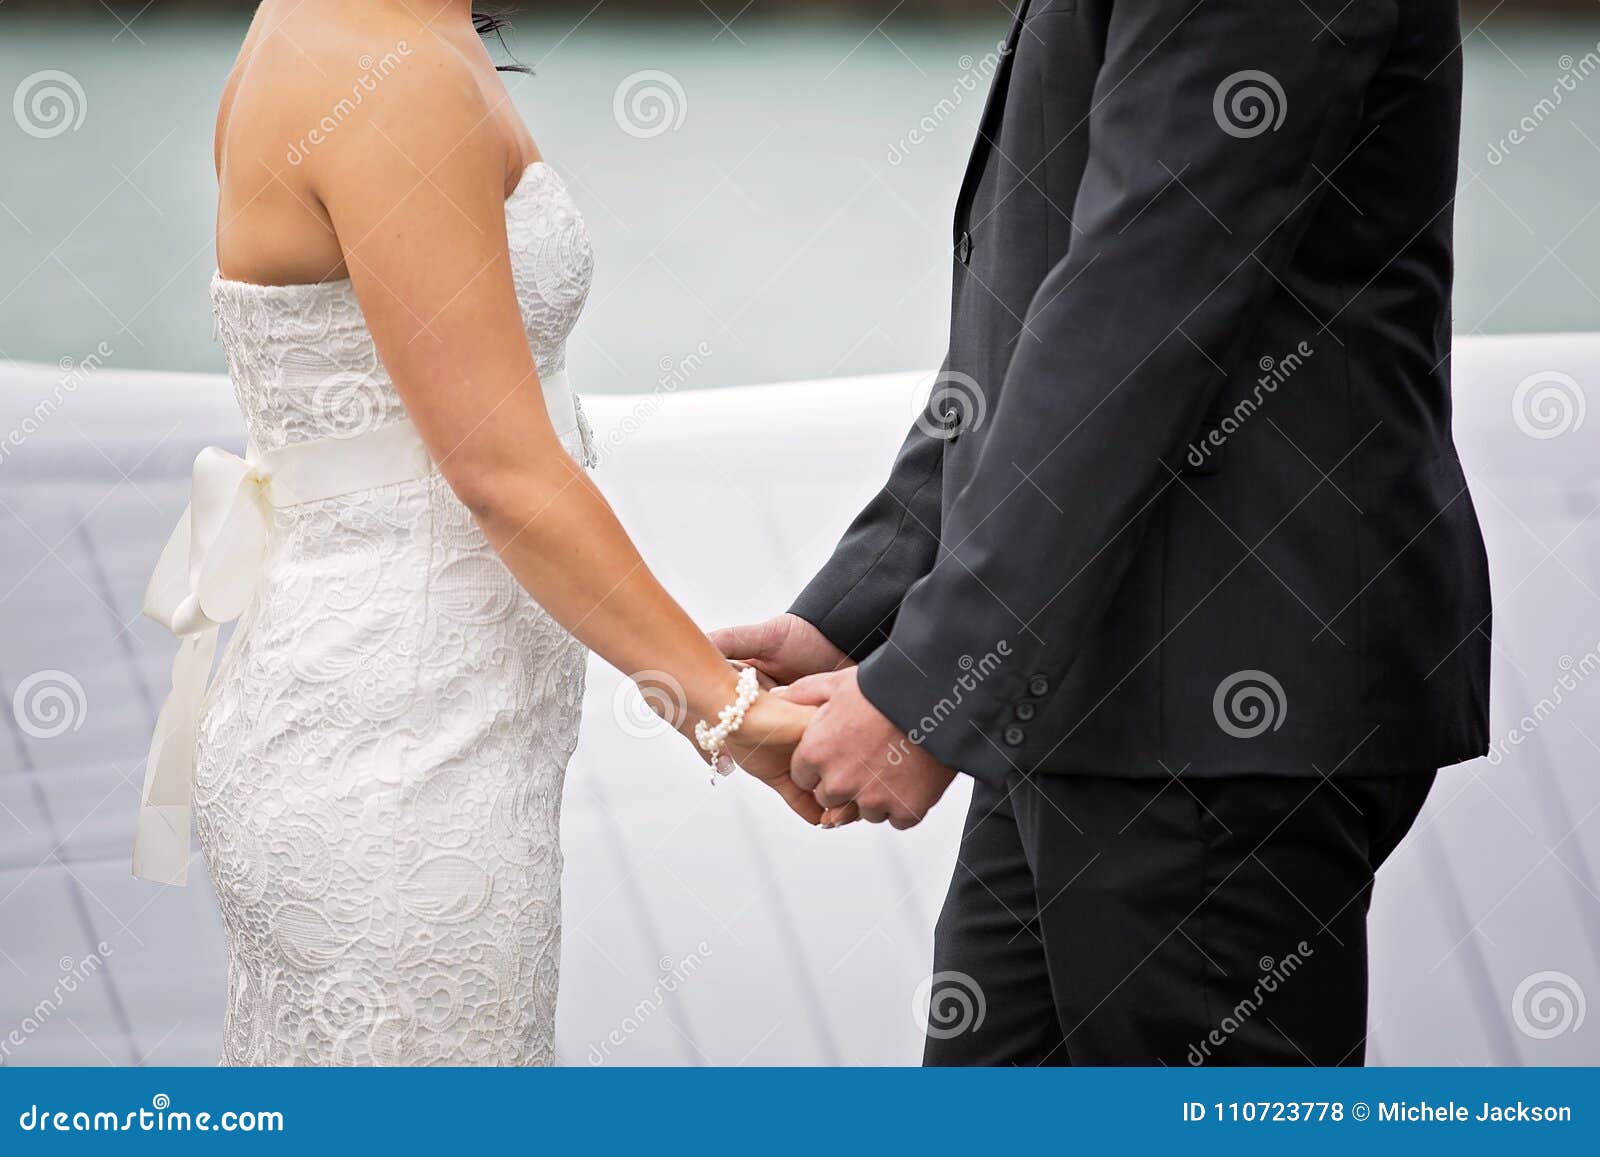 Couple Exchanging Wedding Vows Stock Photo Image Of Bride